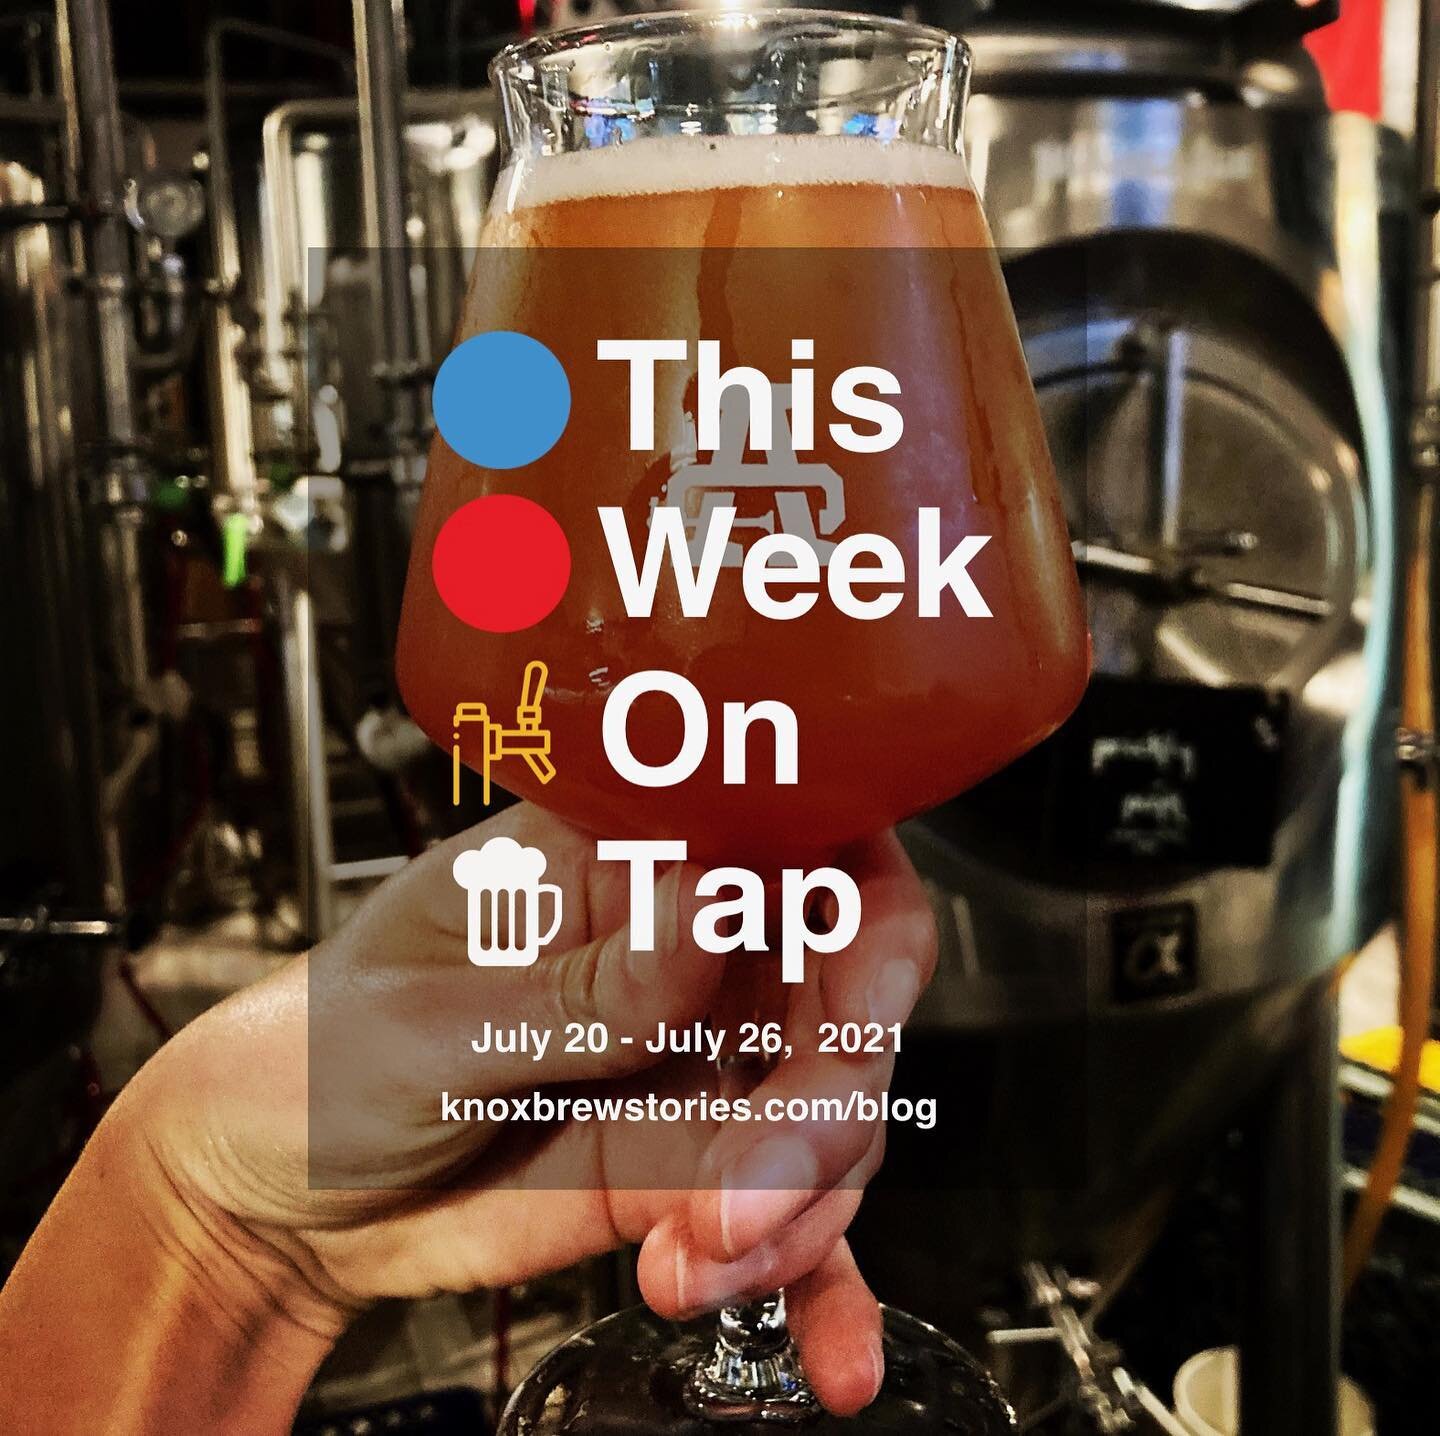 New This Week On Tap blog post is live on our website! Not only are there plenty of delicious new beers being released, we&rsquo;ve got your weekend plans covered with heaps of live music offerings! Check out these events and so much more at knoxbrew